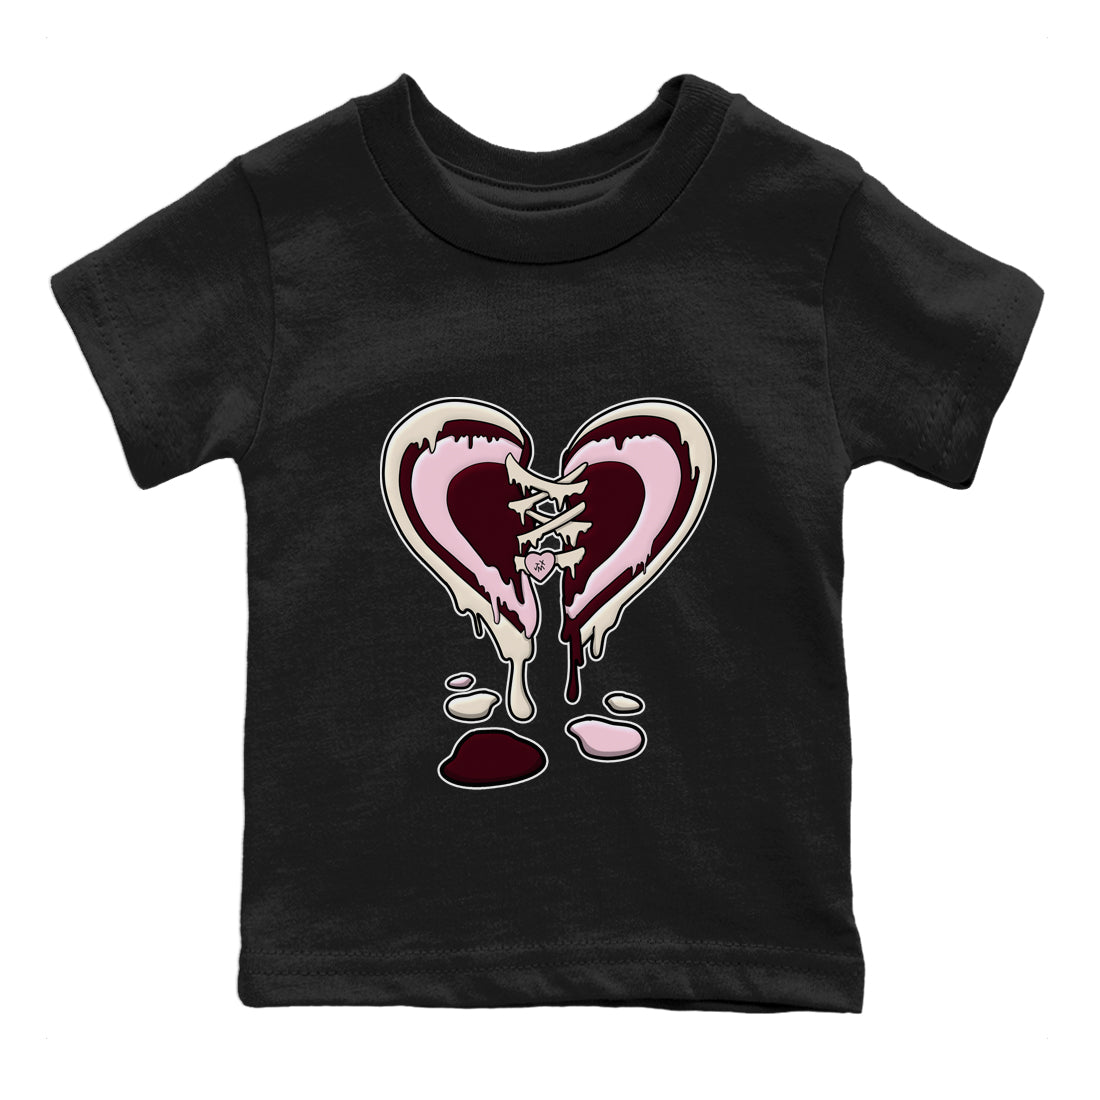 Dunk Valentines Day Sneaker Match Tees Melting Heart Sneaker Tees Nike Dunk Valentine's Day Sneaker SNRT Sneaker Tees Kids Shirts